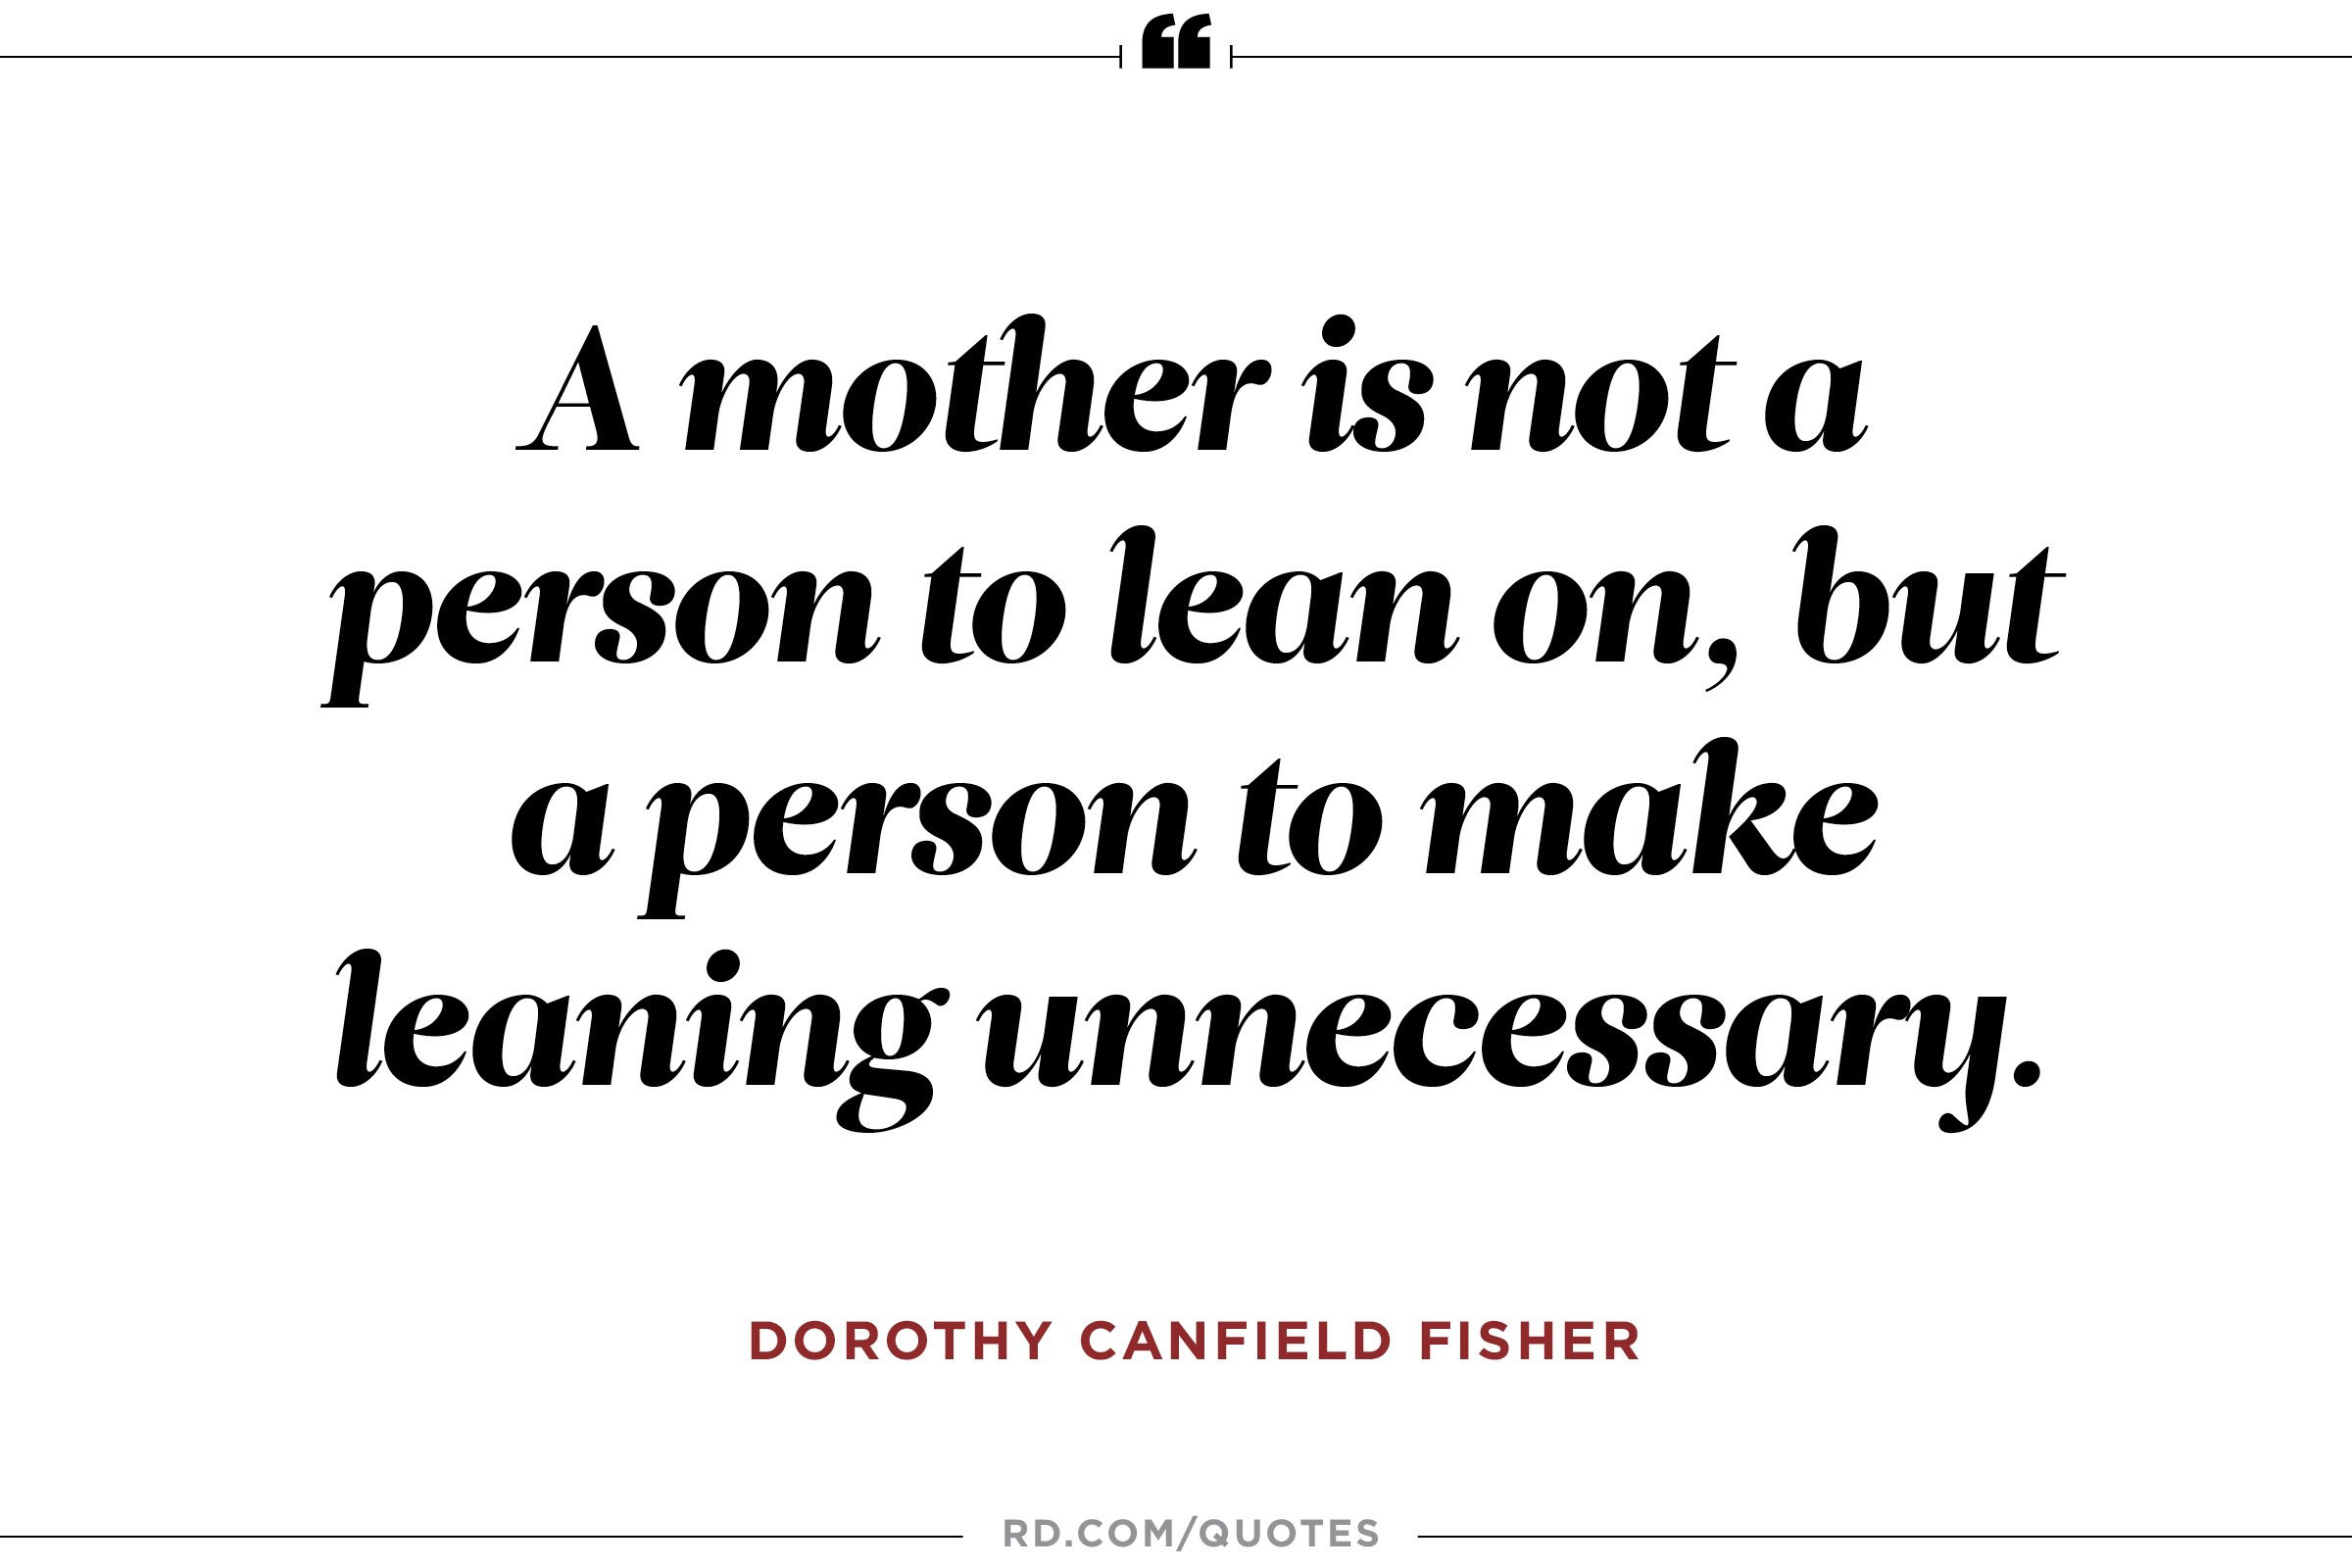 Quote On Mothers
 11 Quotes About Mothers That ll Make You Call Yours